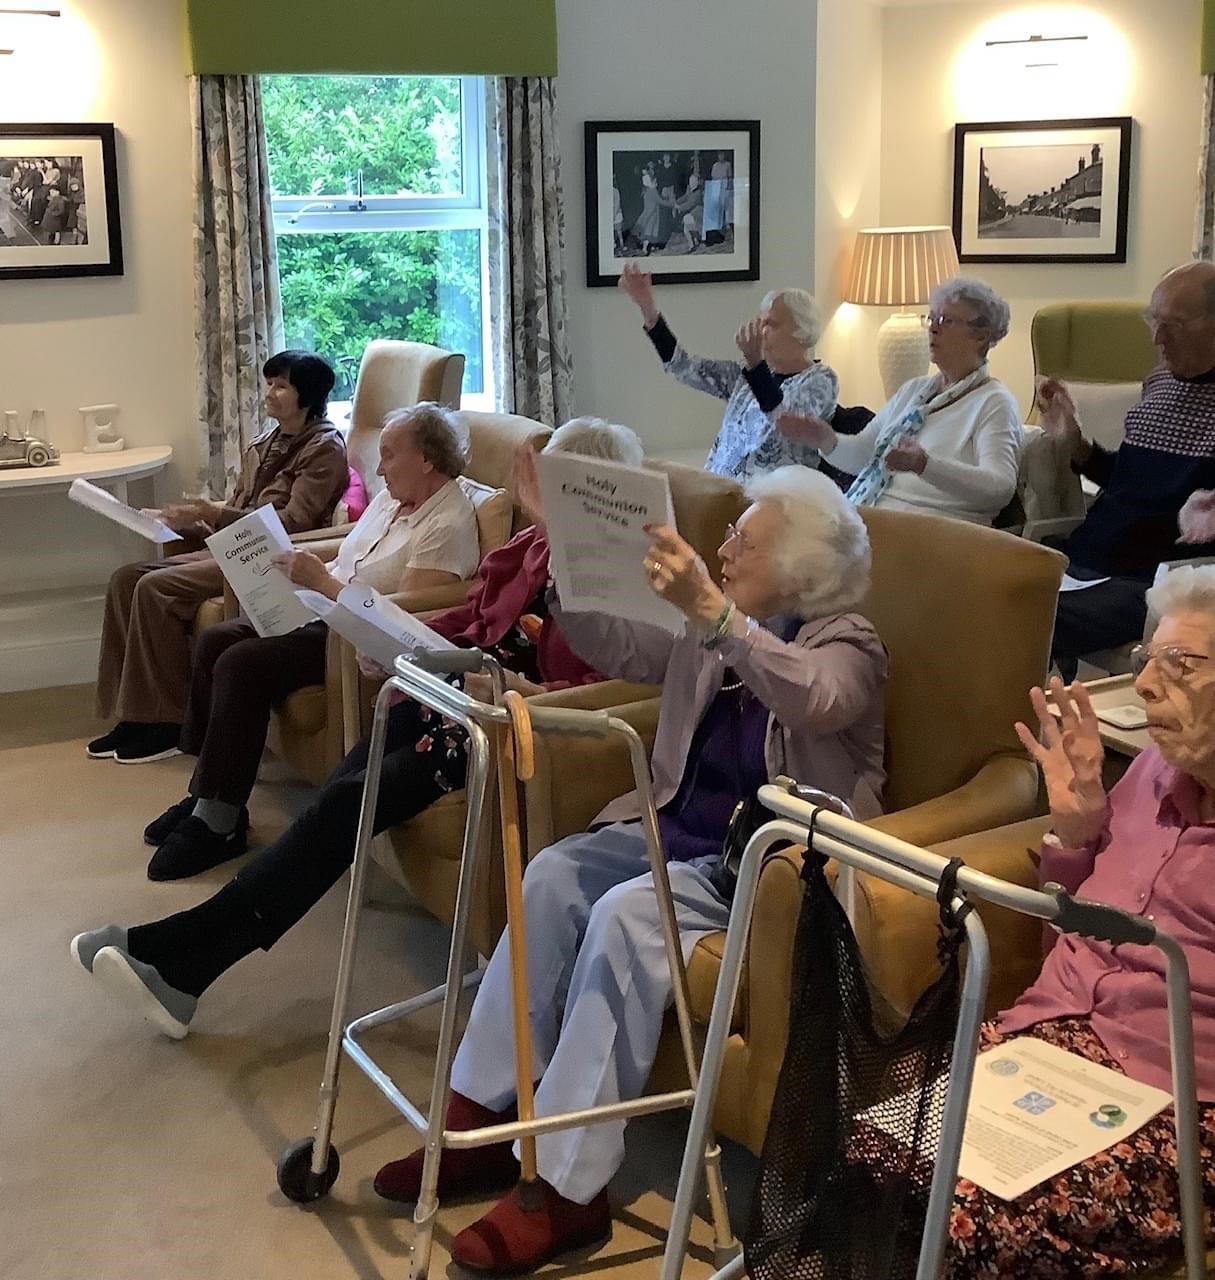 Residents of a care homes sitting in rows and raising their arms in worship